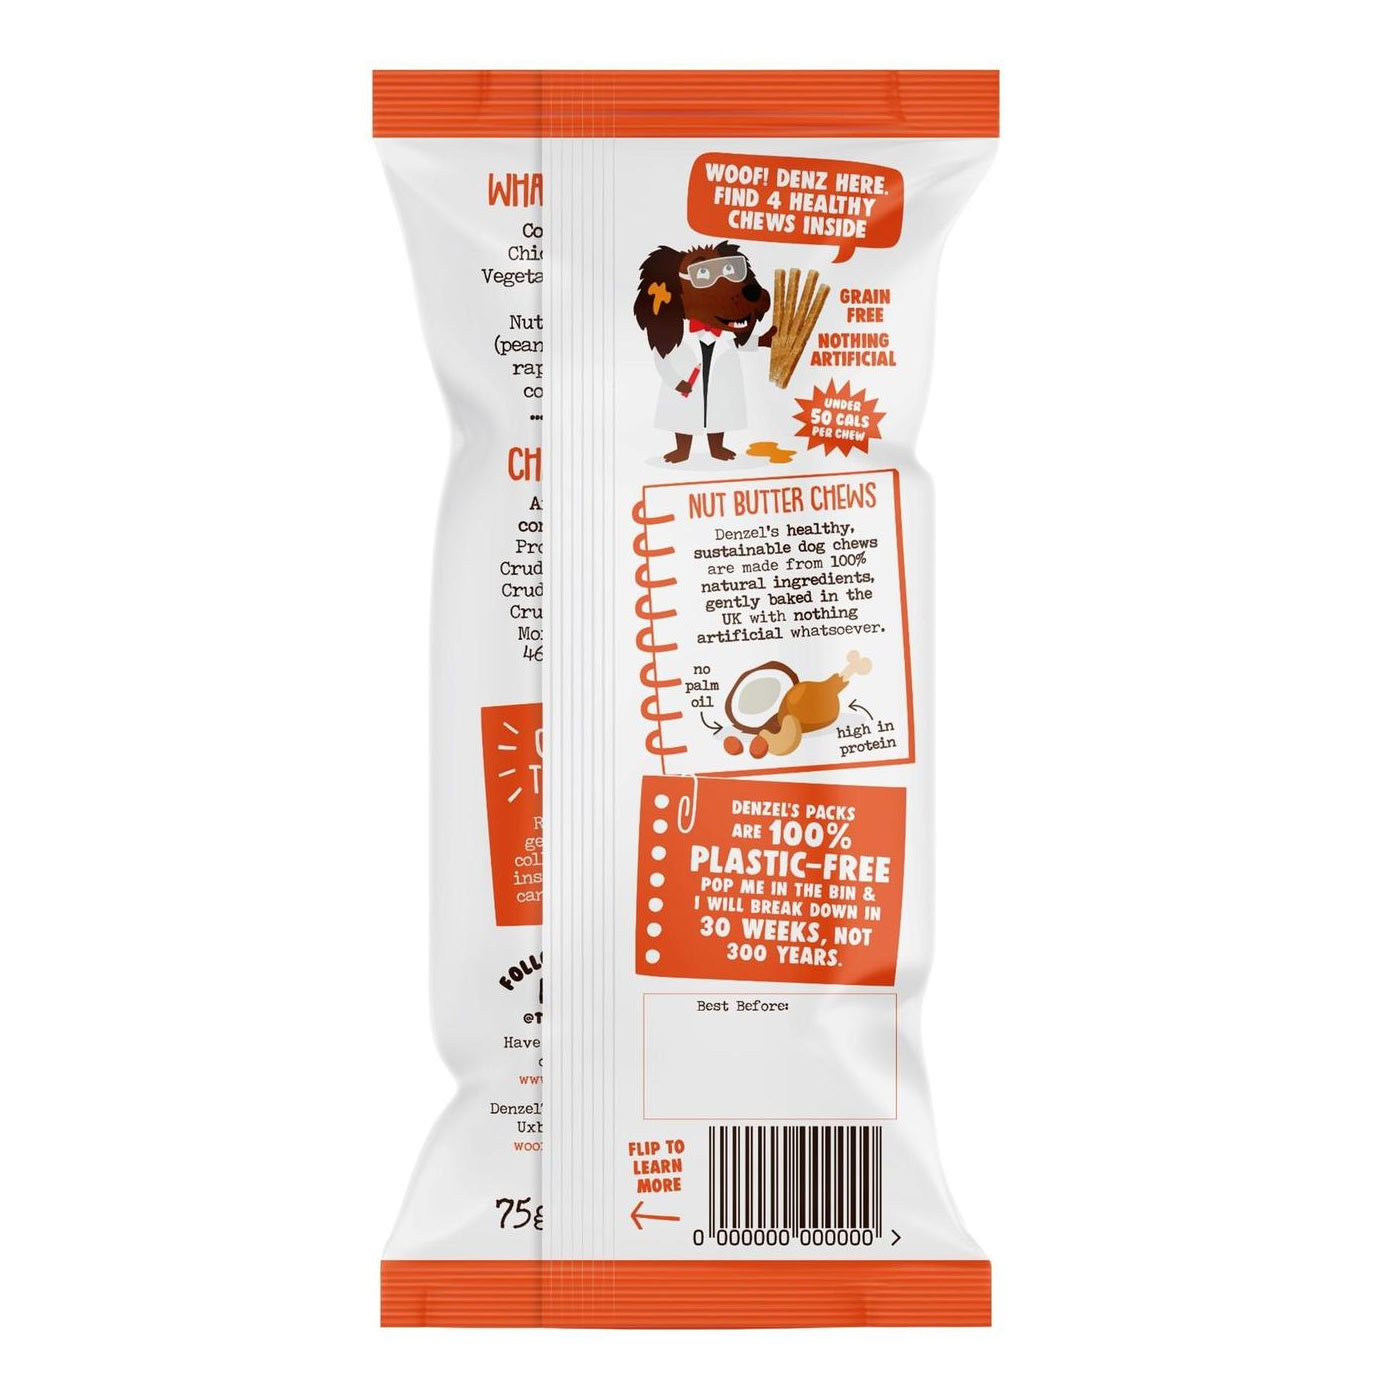 Denzel's Nut Butter Soft Chews For Dogs - 4 pack